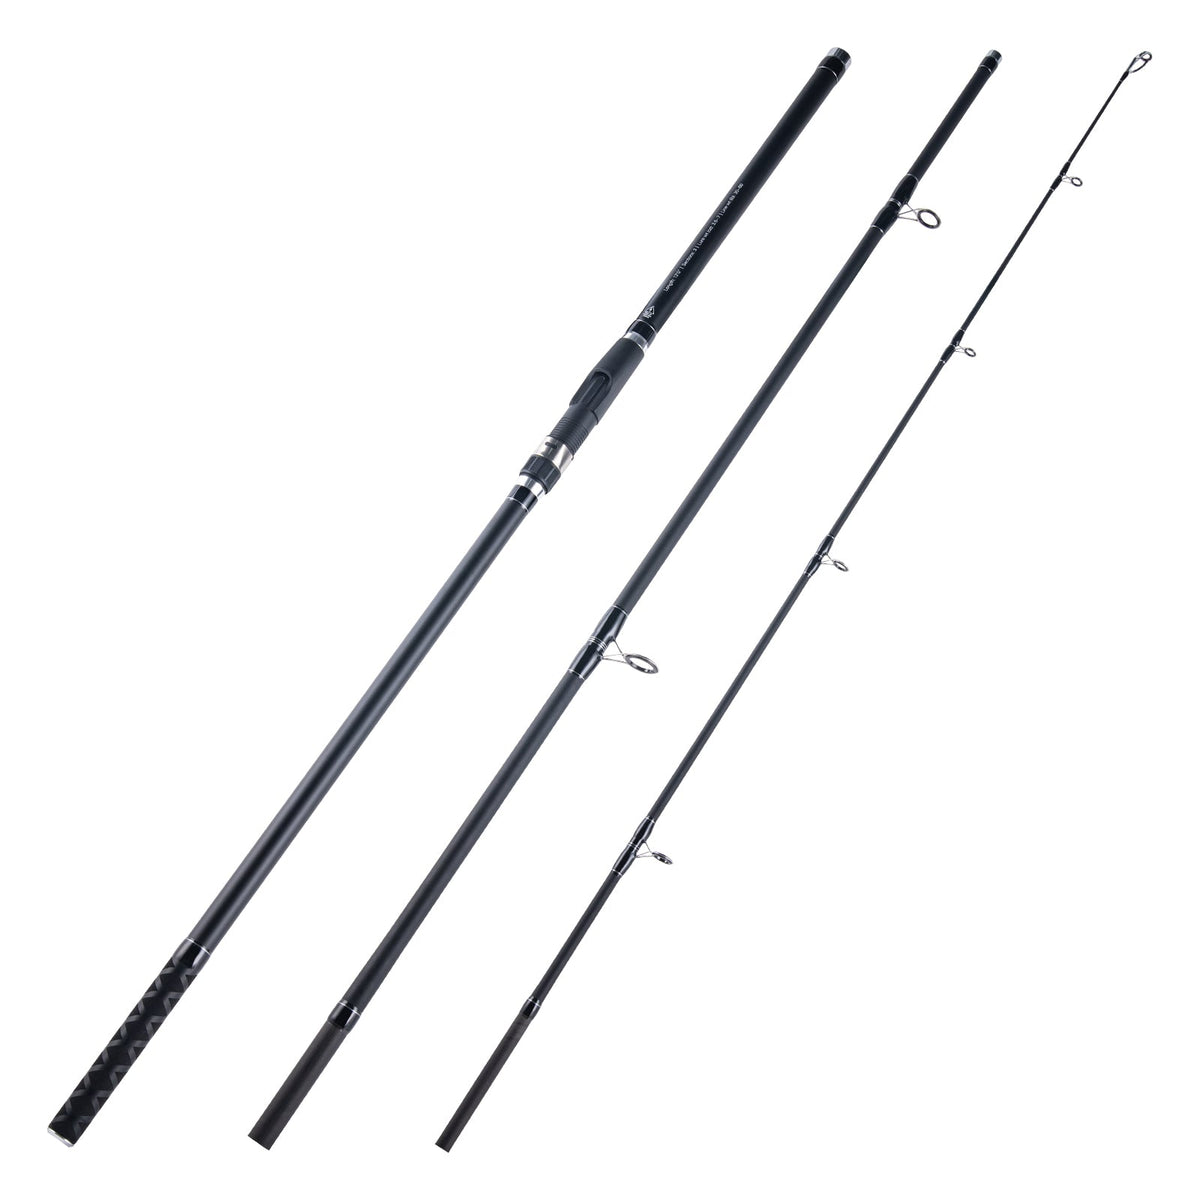 Goture SITULA 3PCS Crappie Spinning Fishing Rod